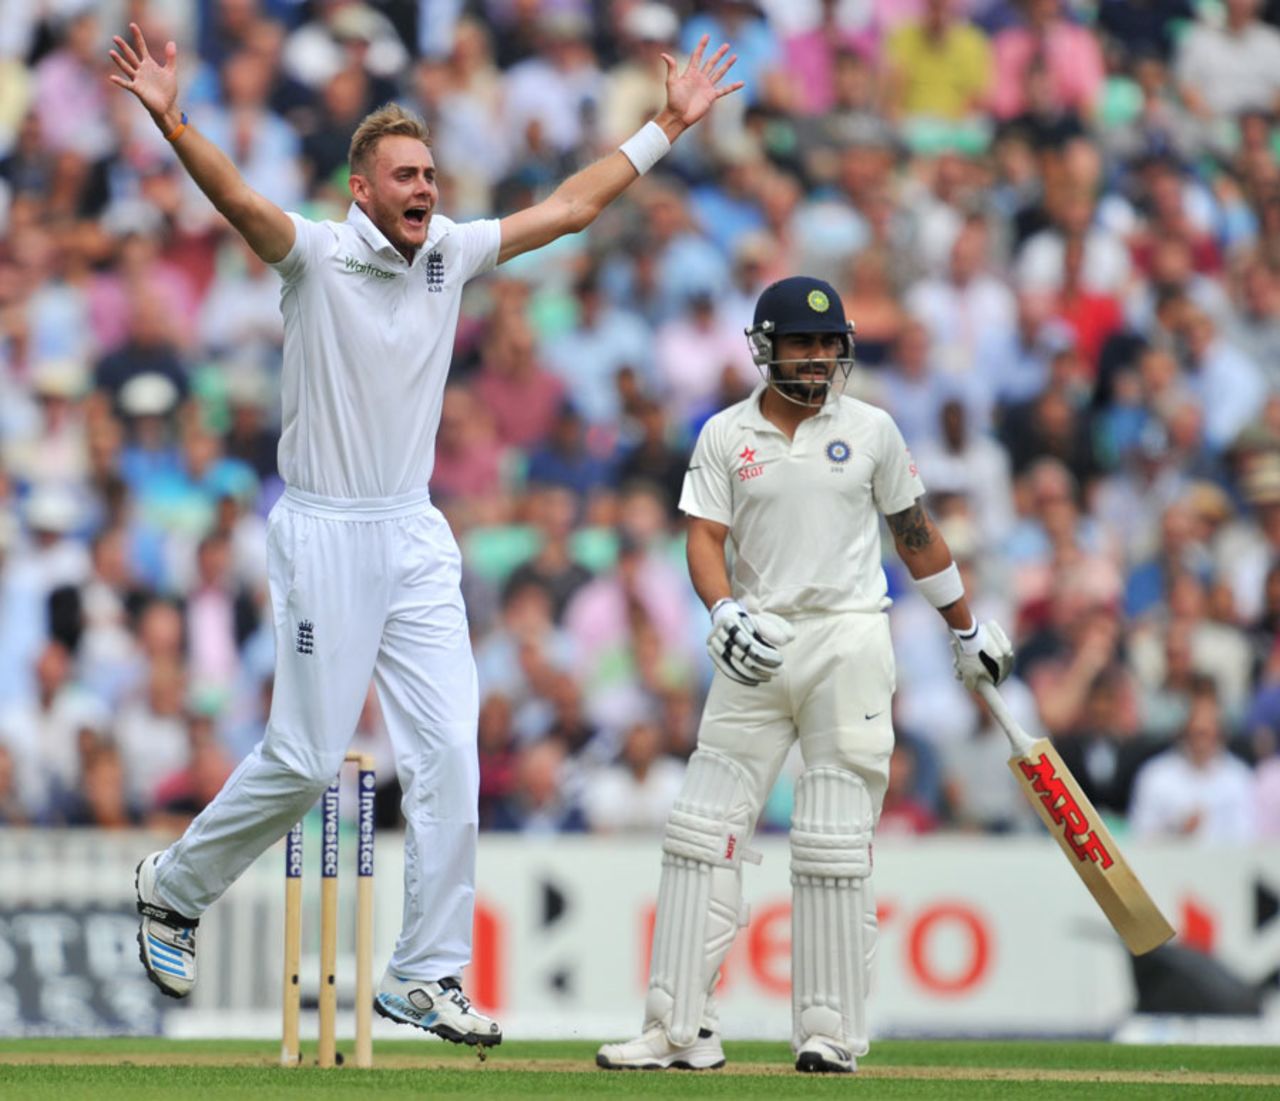 England were all over Virat Kohli, England v India, 5th Investec Test, The Oval, 1st day, August 15, 2014